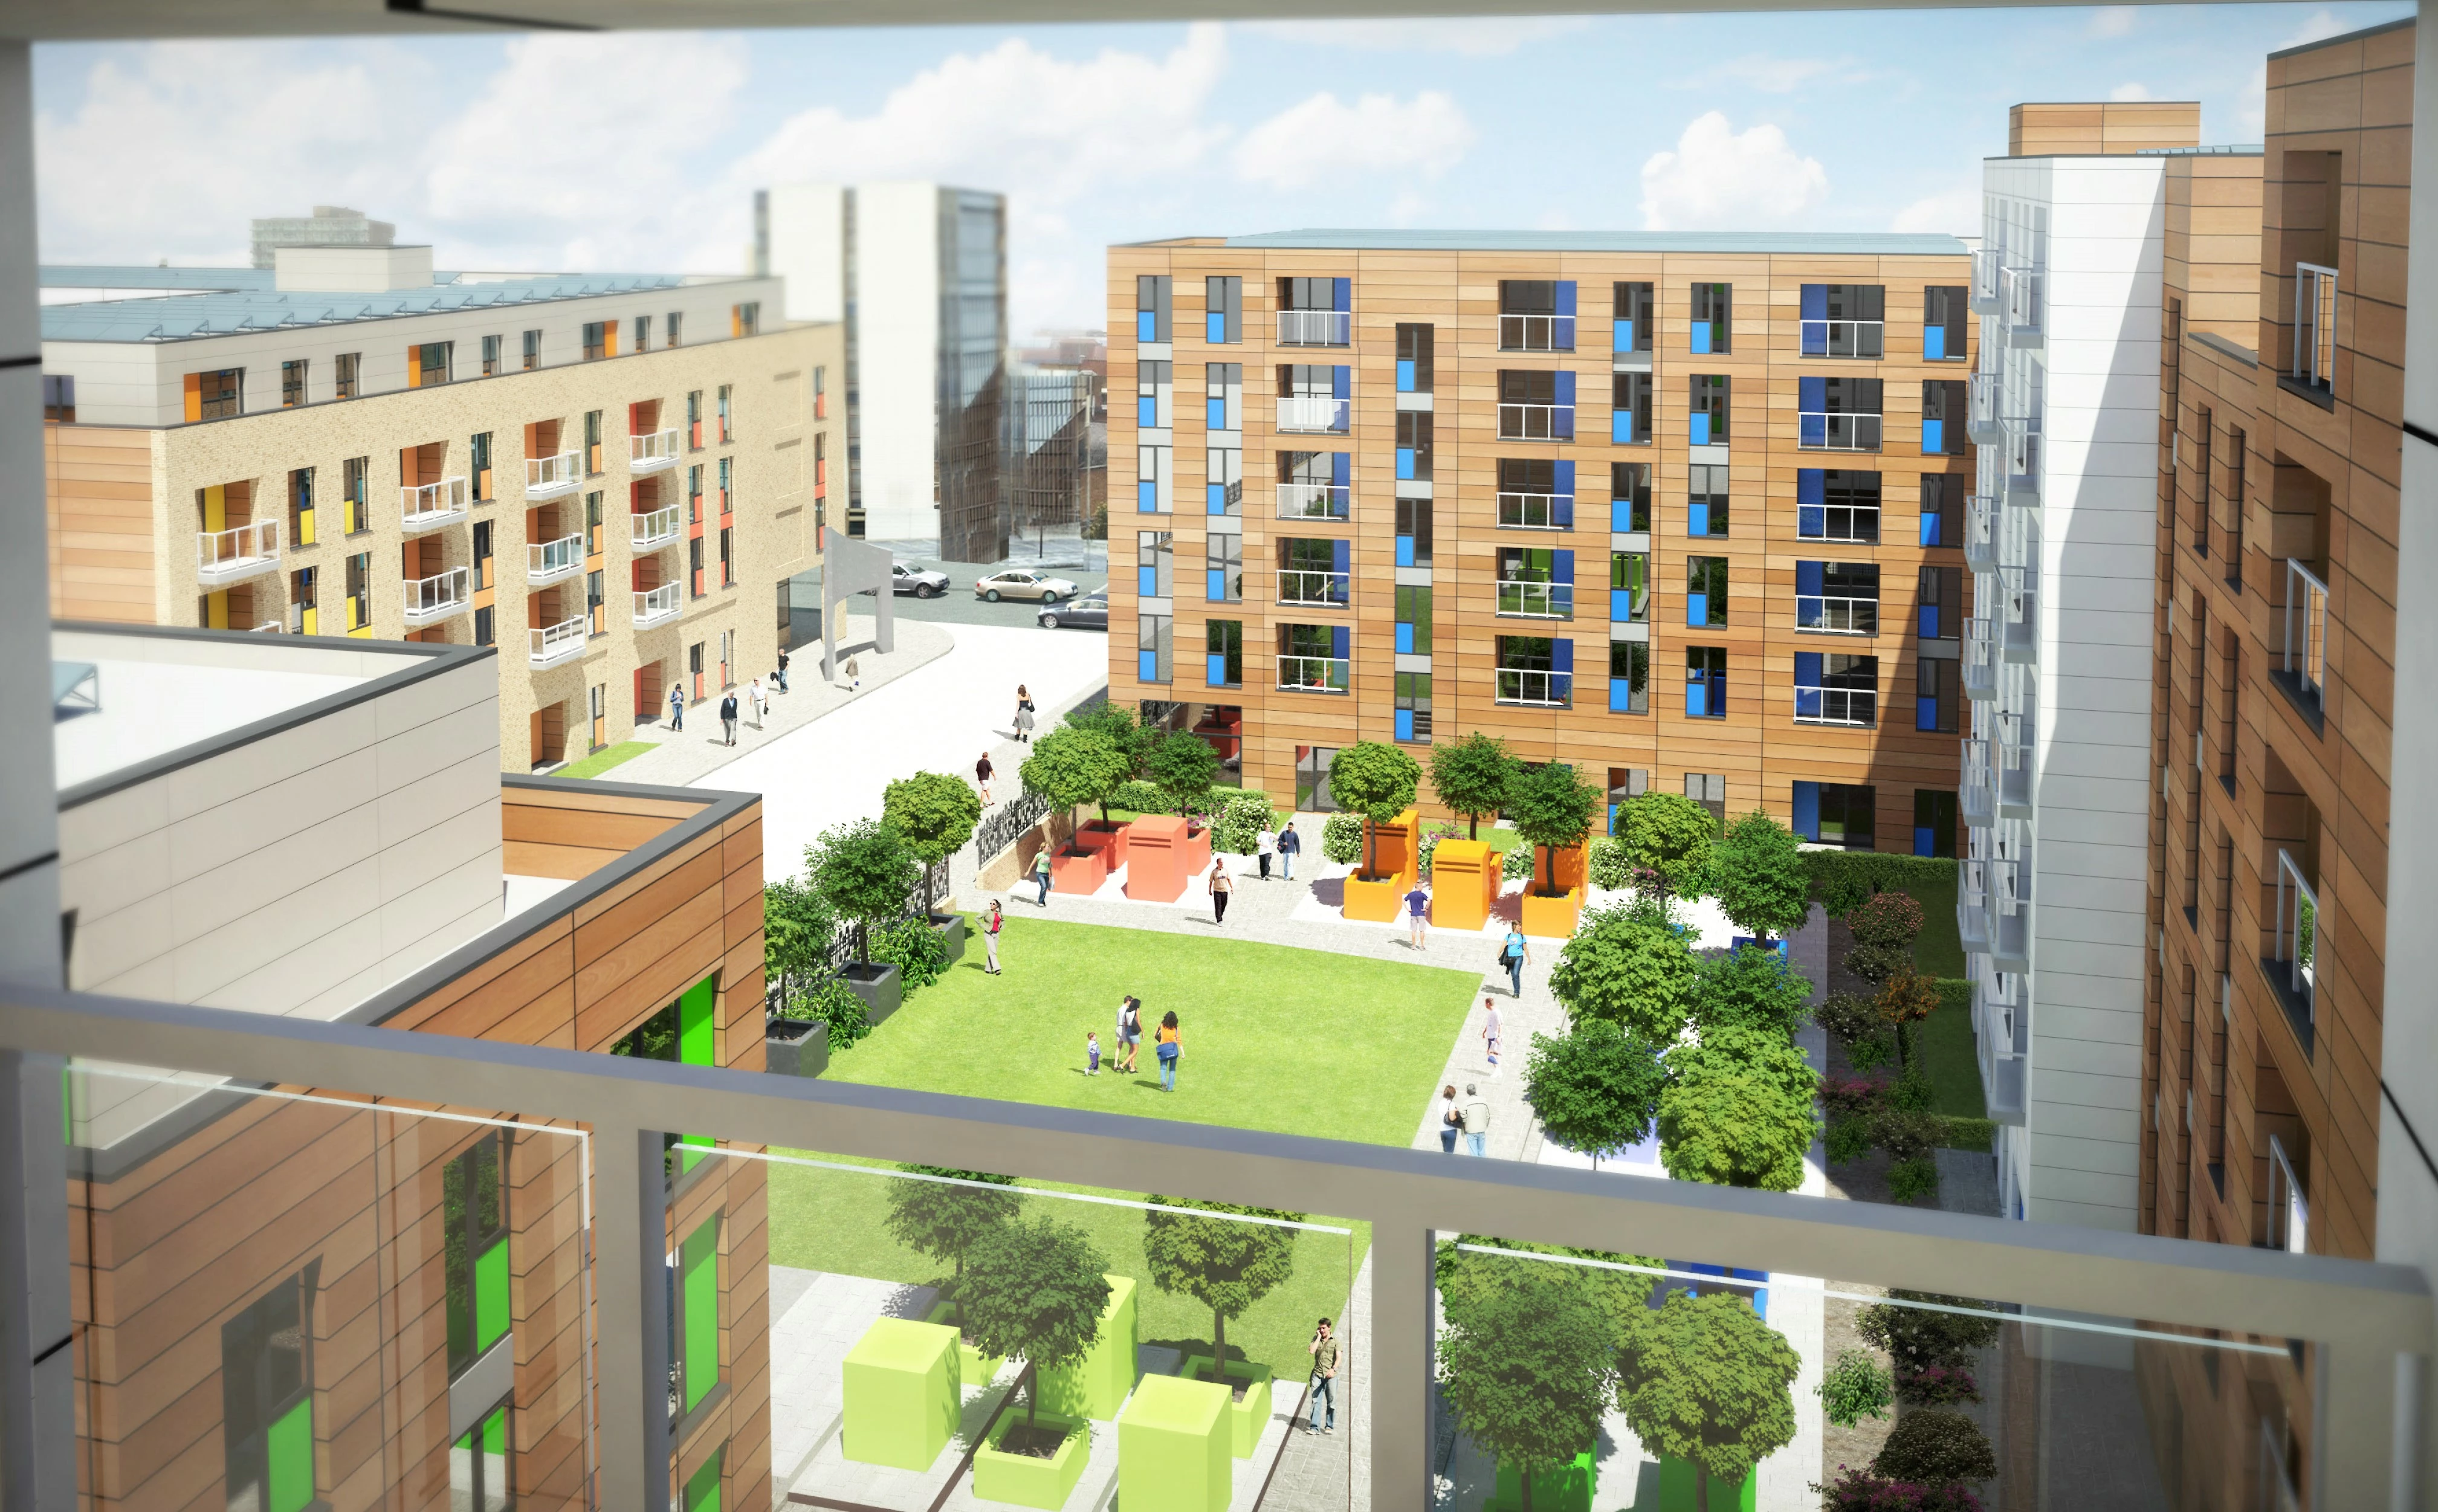  A CGI of the Fruit & Vegetable Market, one of Hampshire & Regional Property Group's key projects 